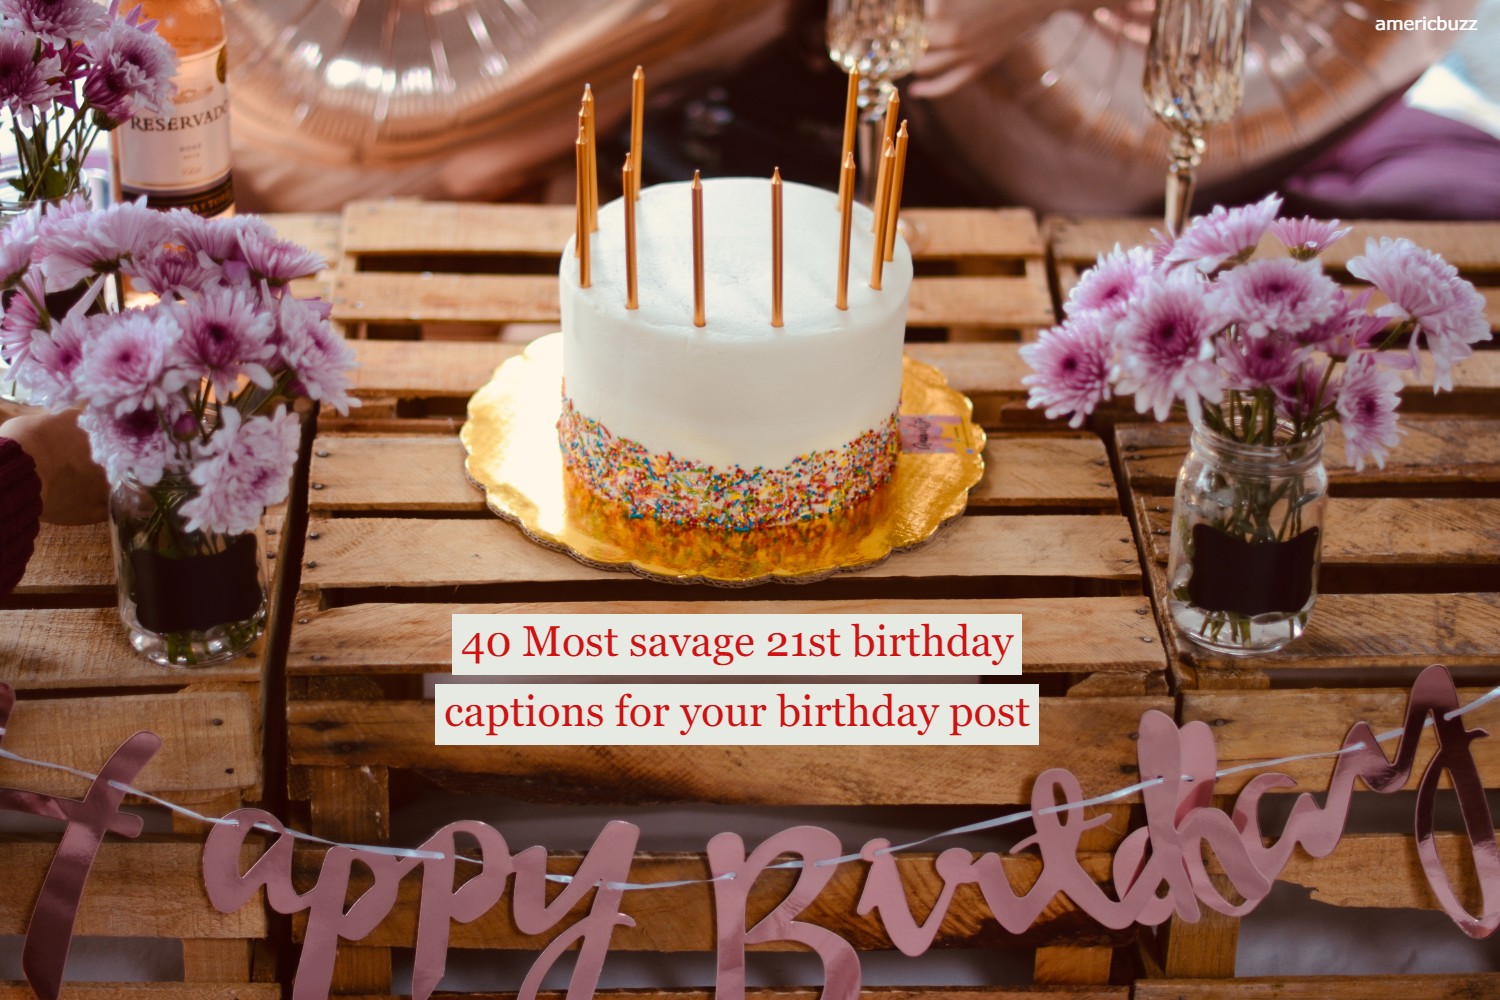 40 Most savage 21st birthday captions for your birthday post